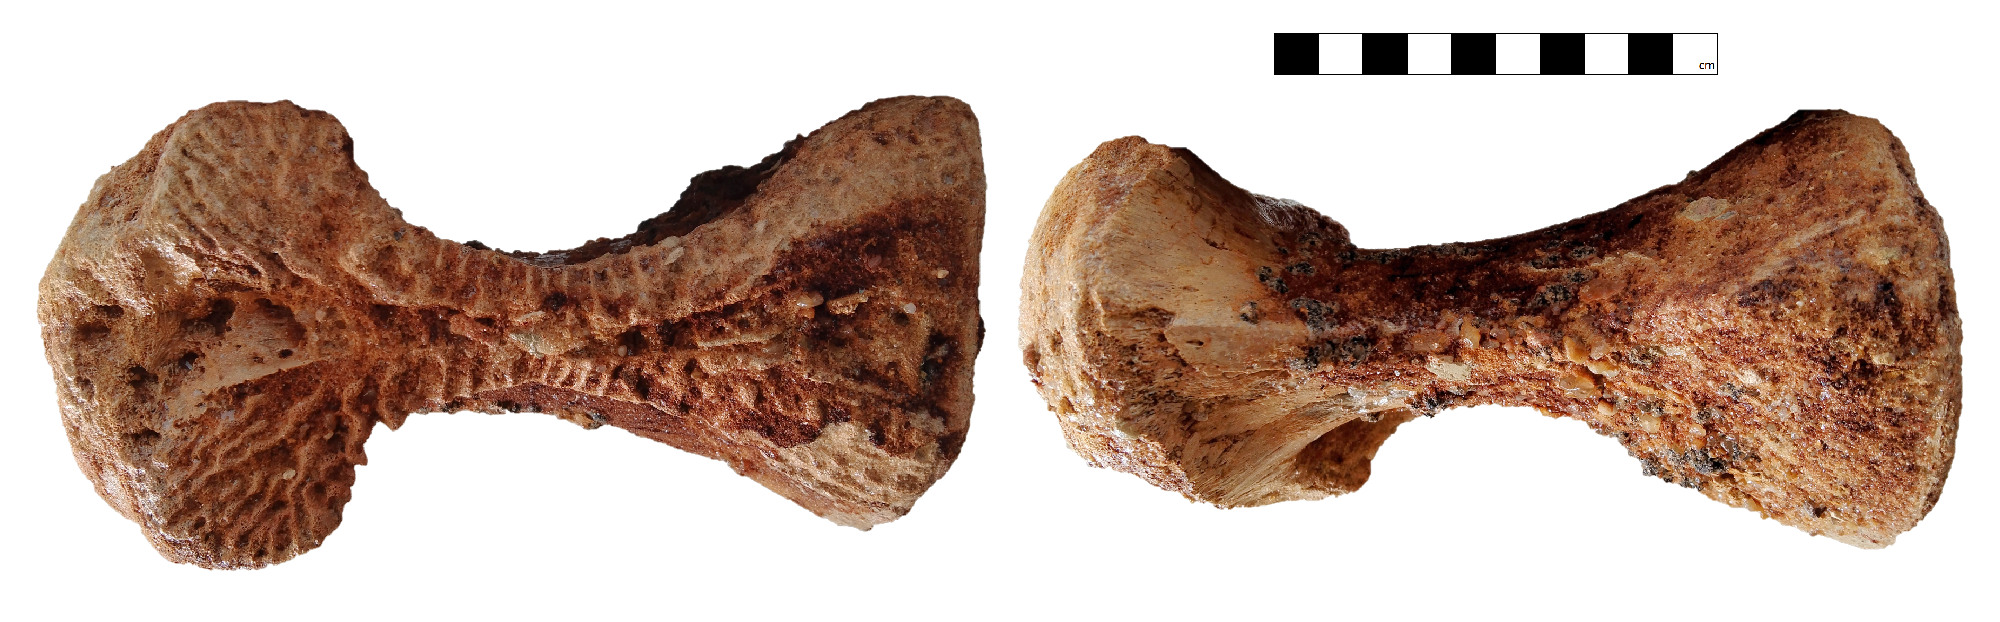 Mid dorsal vertebra (GCE2104133945) of Spinosaurid tentatively refer as Spinosaurus dorsojuvencus. From left image: in dorsal view (top view, anterior face to the left); Right image: in ventral view (bottom view, anterior face to the left)